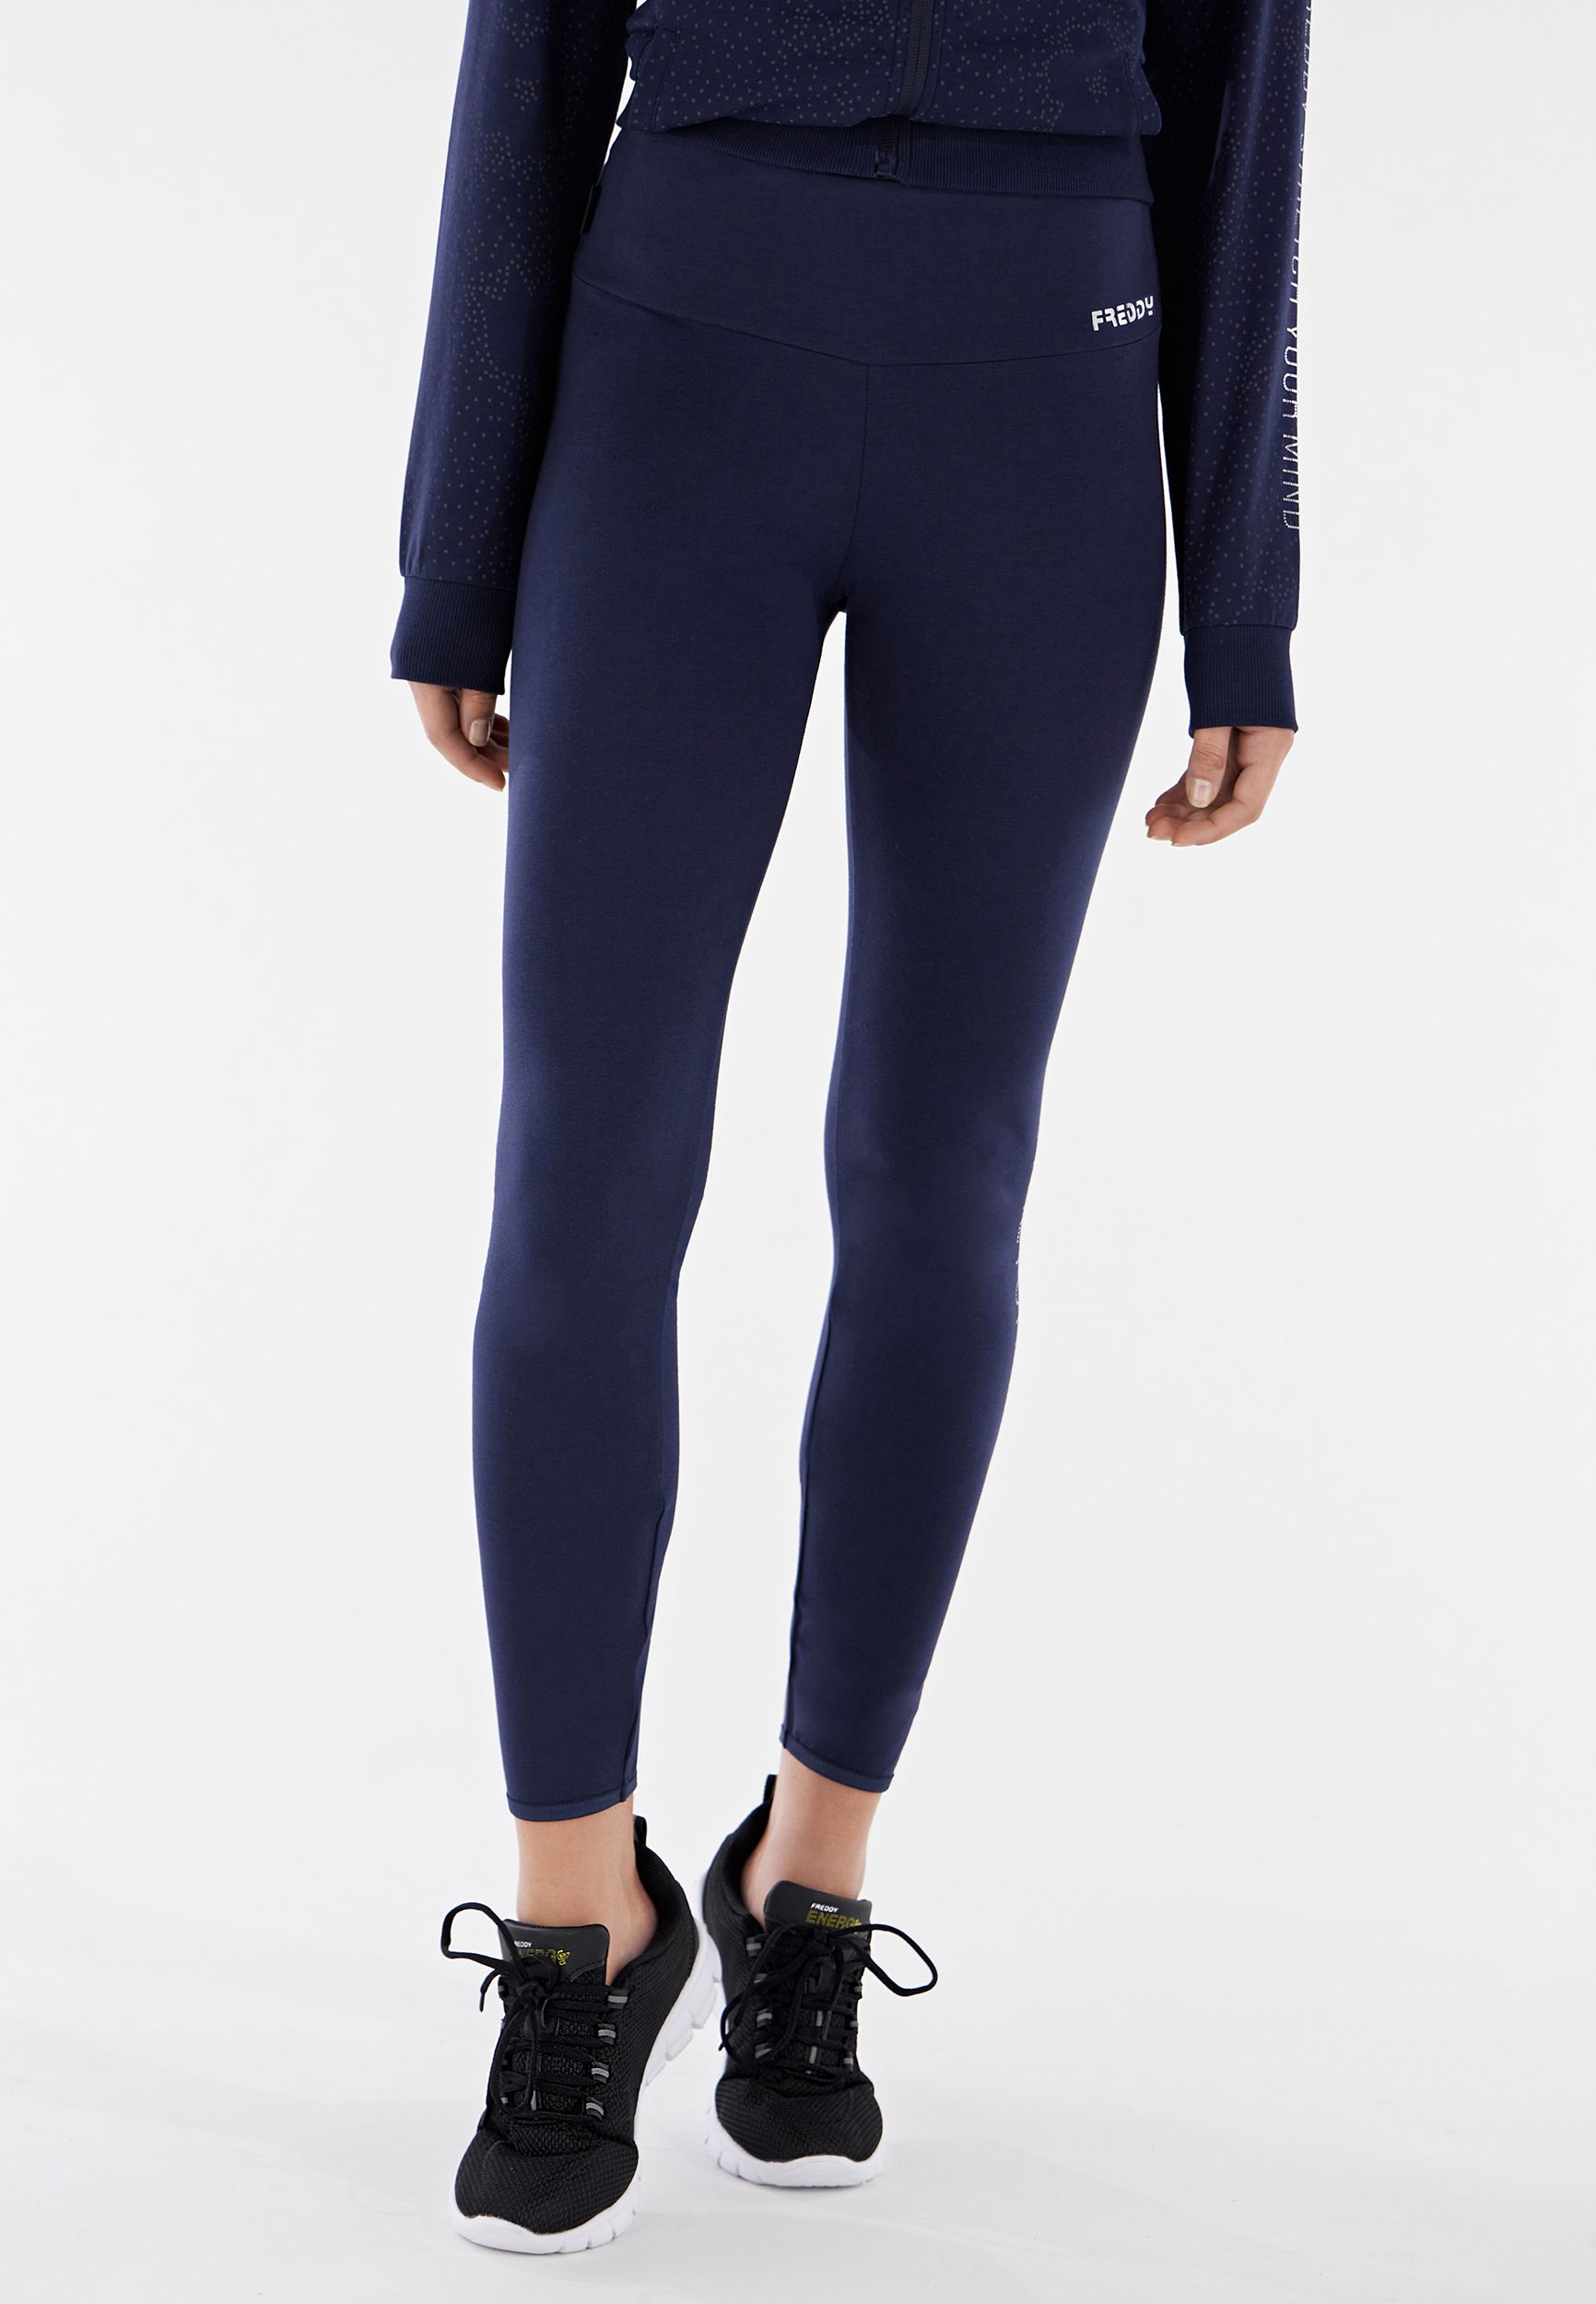 High-waist ankle-length fitness leggings with a silver dotted print